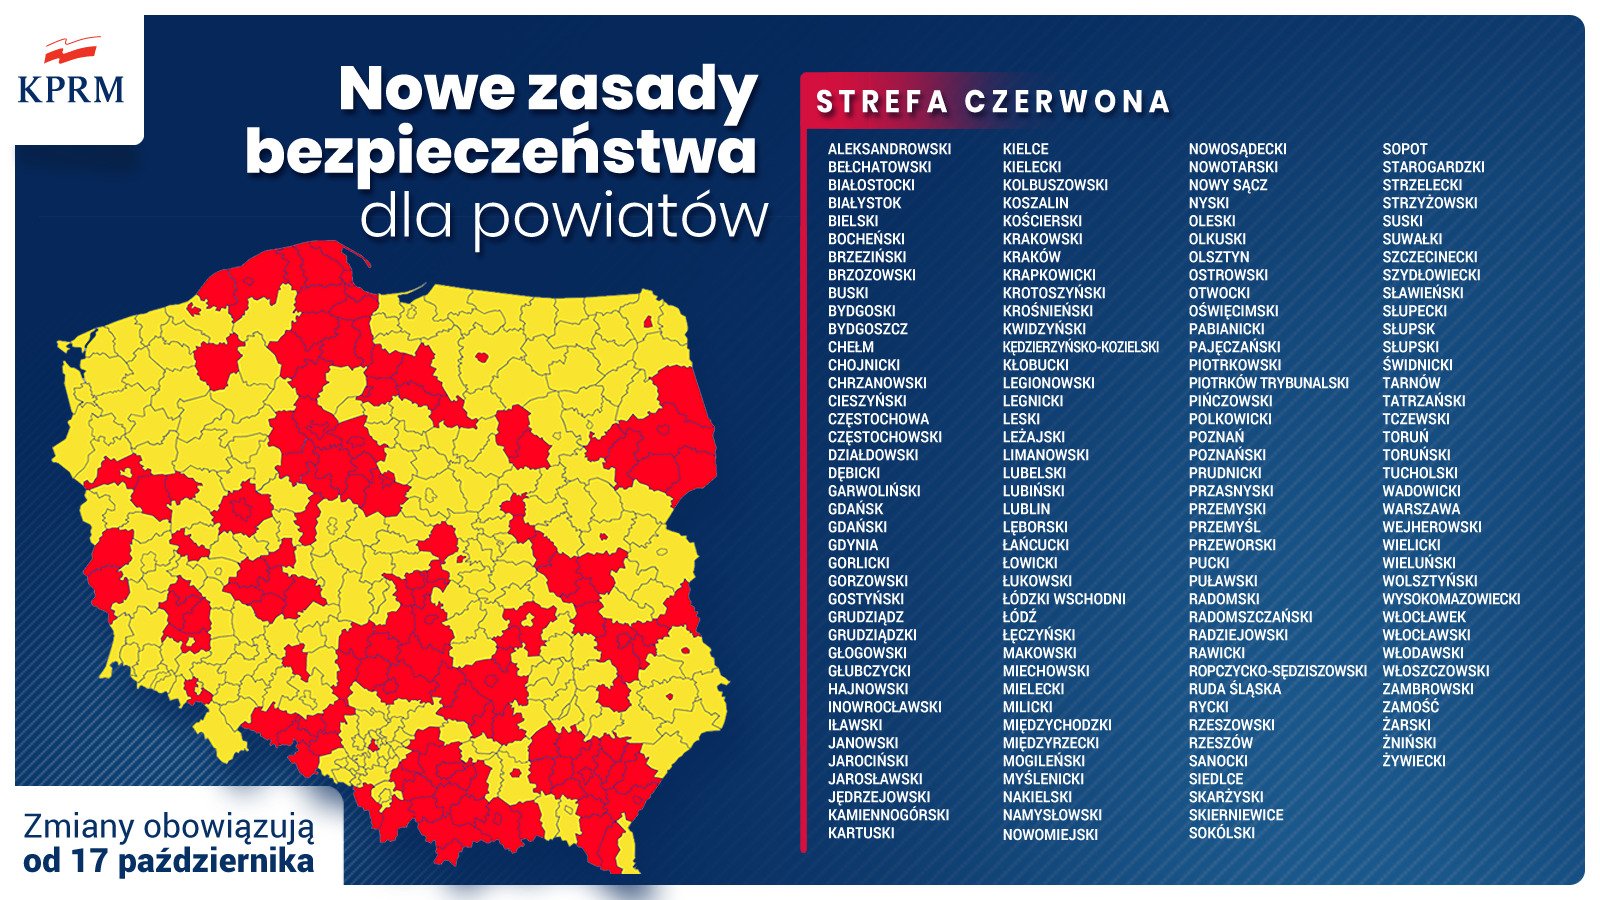 Covid-19 measures in Poland from 17 October